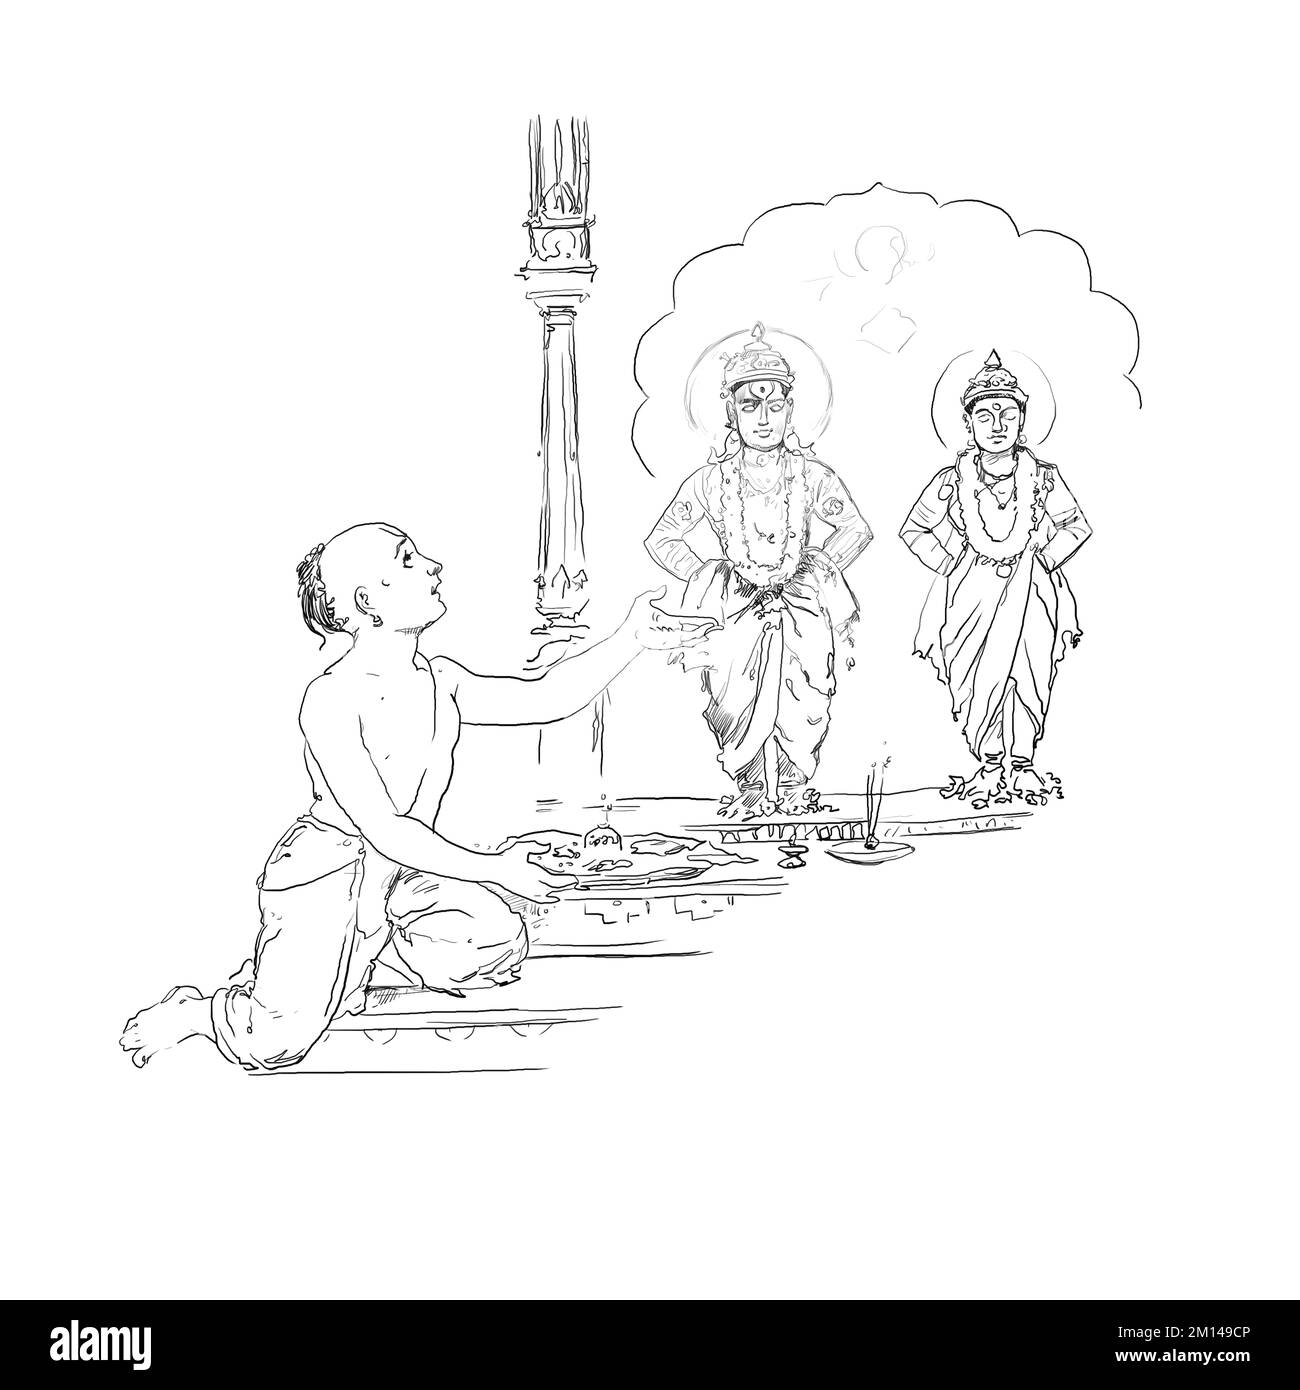 Vitthal Black and White Stock Photos & Images - Alamy